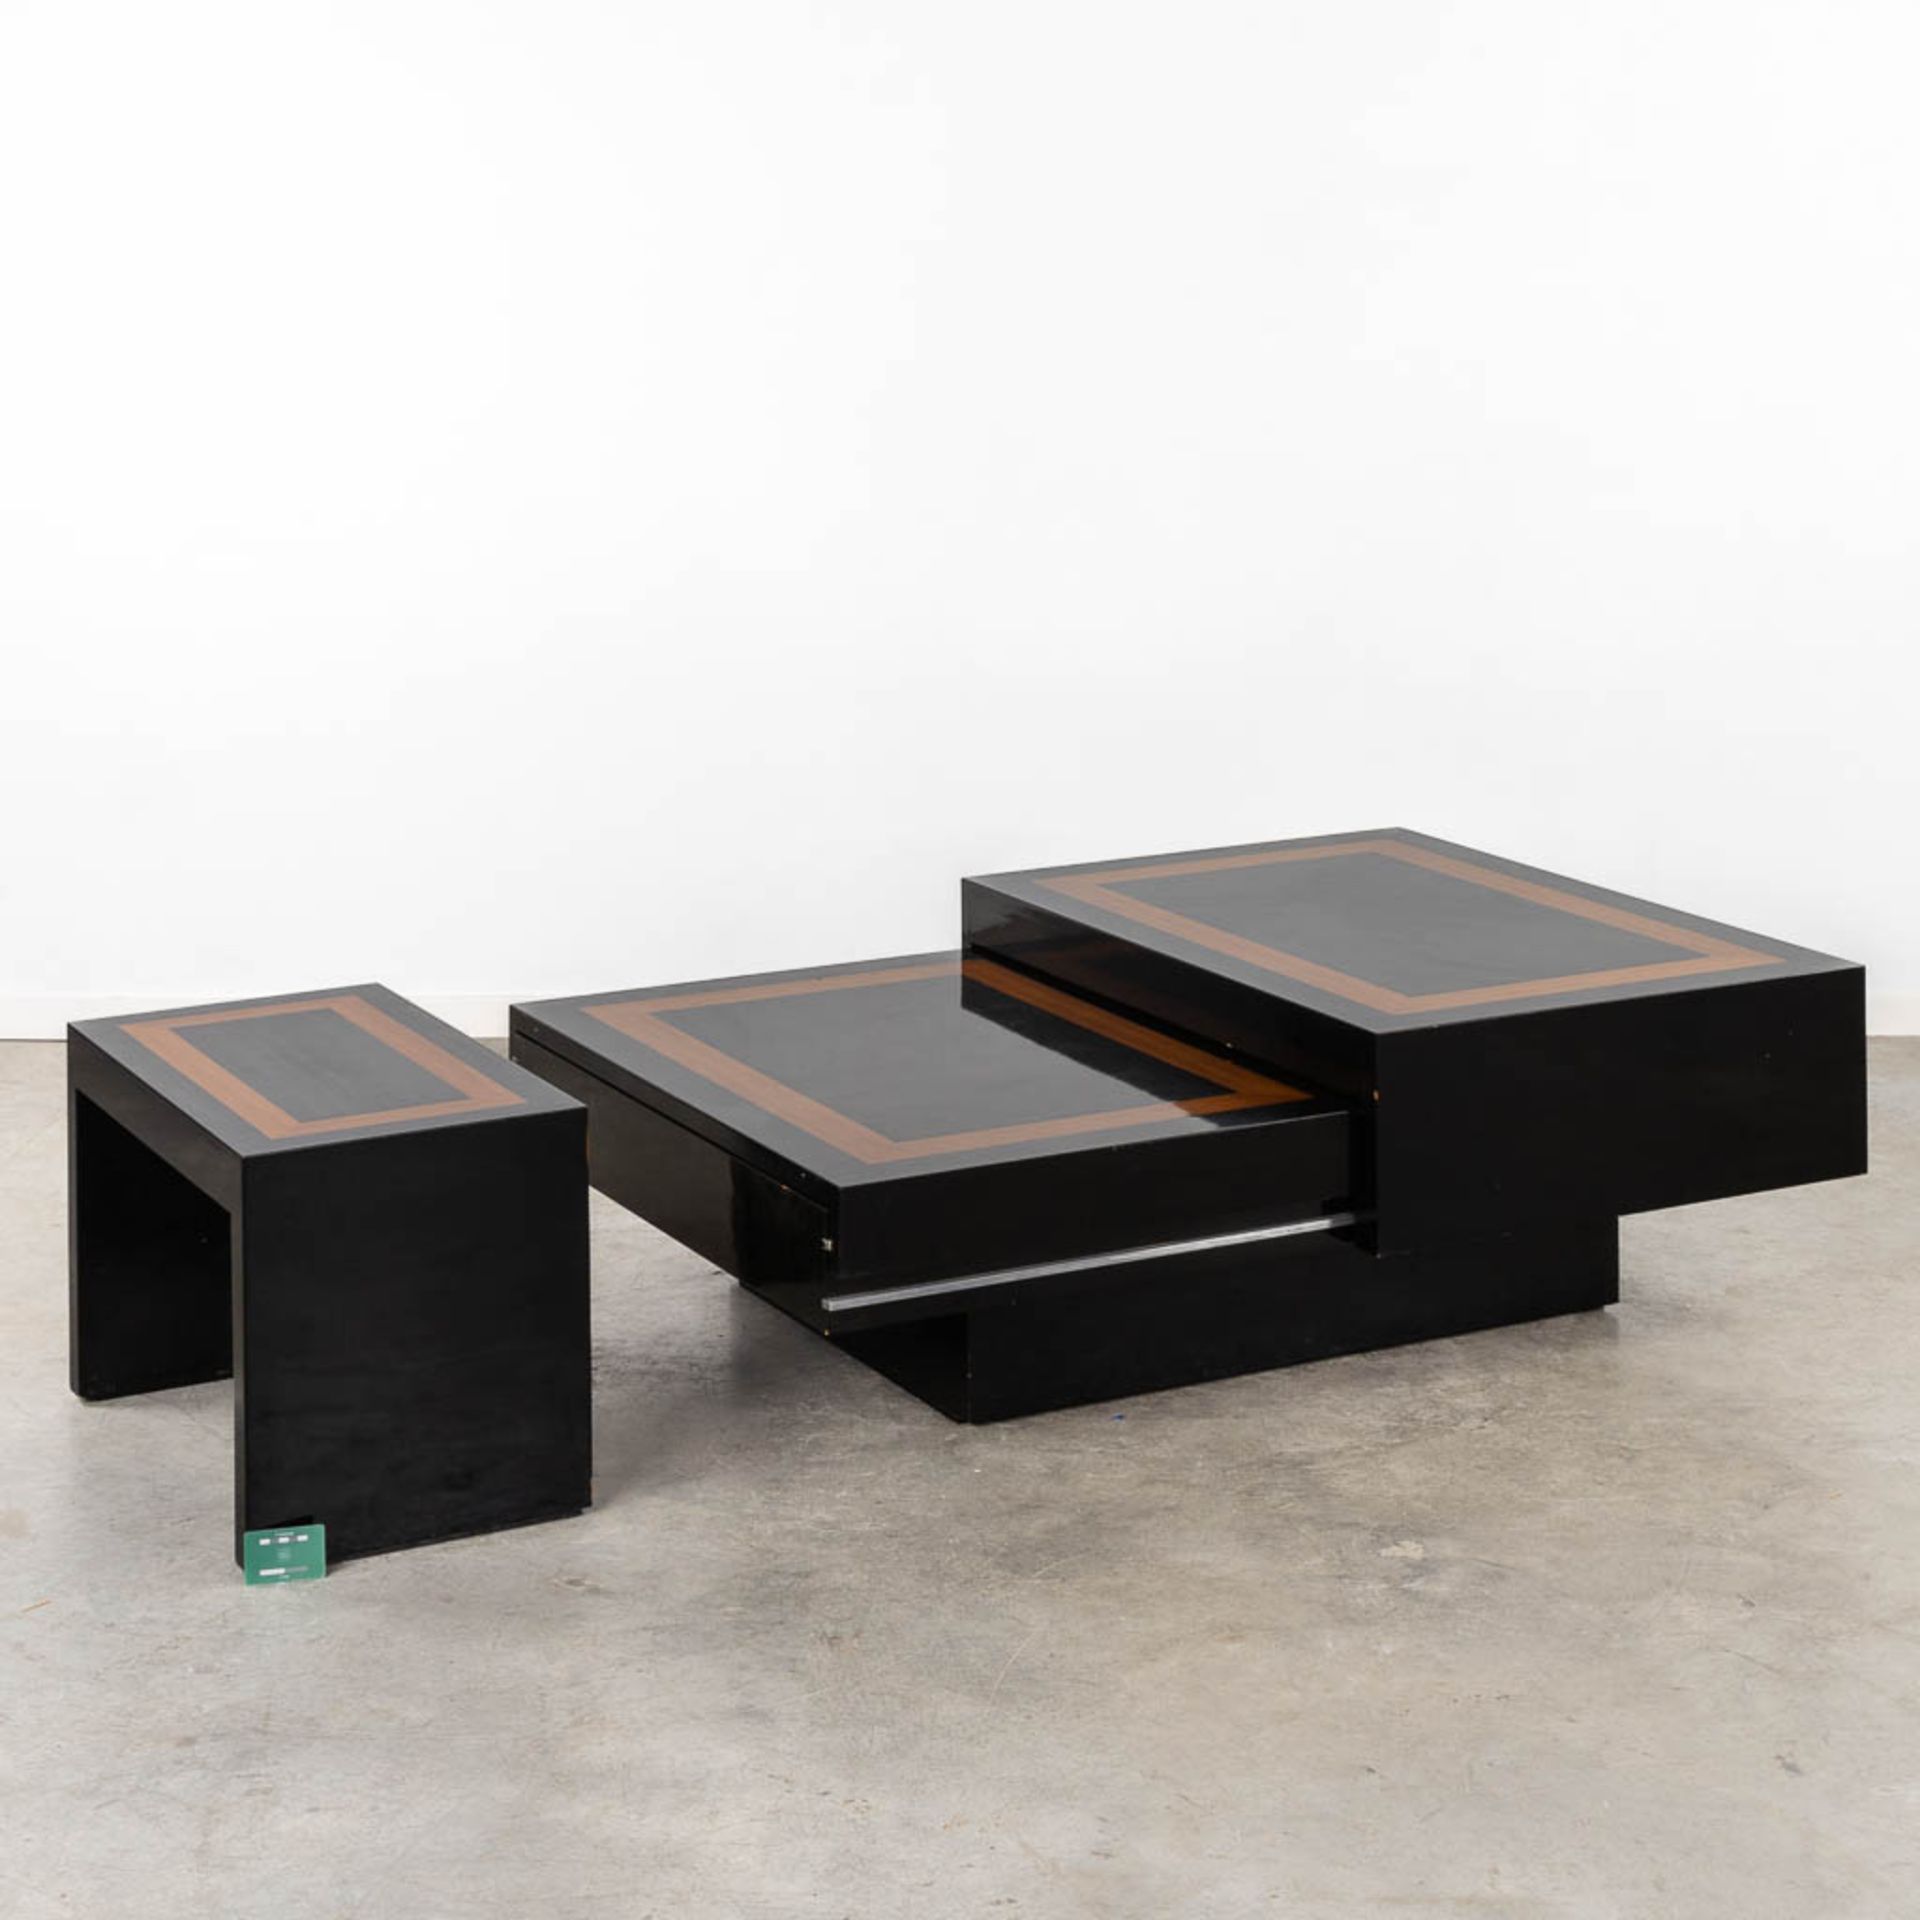 A slideable coffee table, added a bench. Lacquered wood. (L:110 x W:145 x H:47 cm) - Bild 2 aus 9